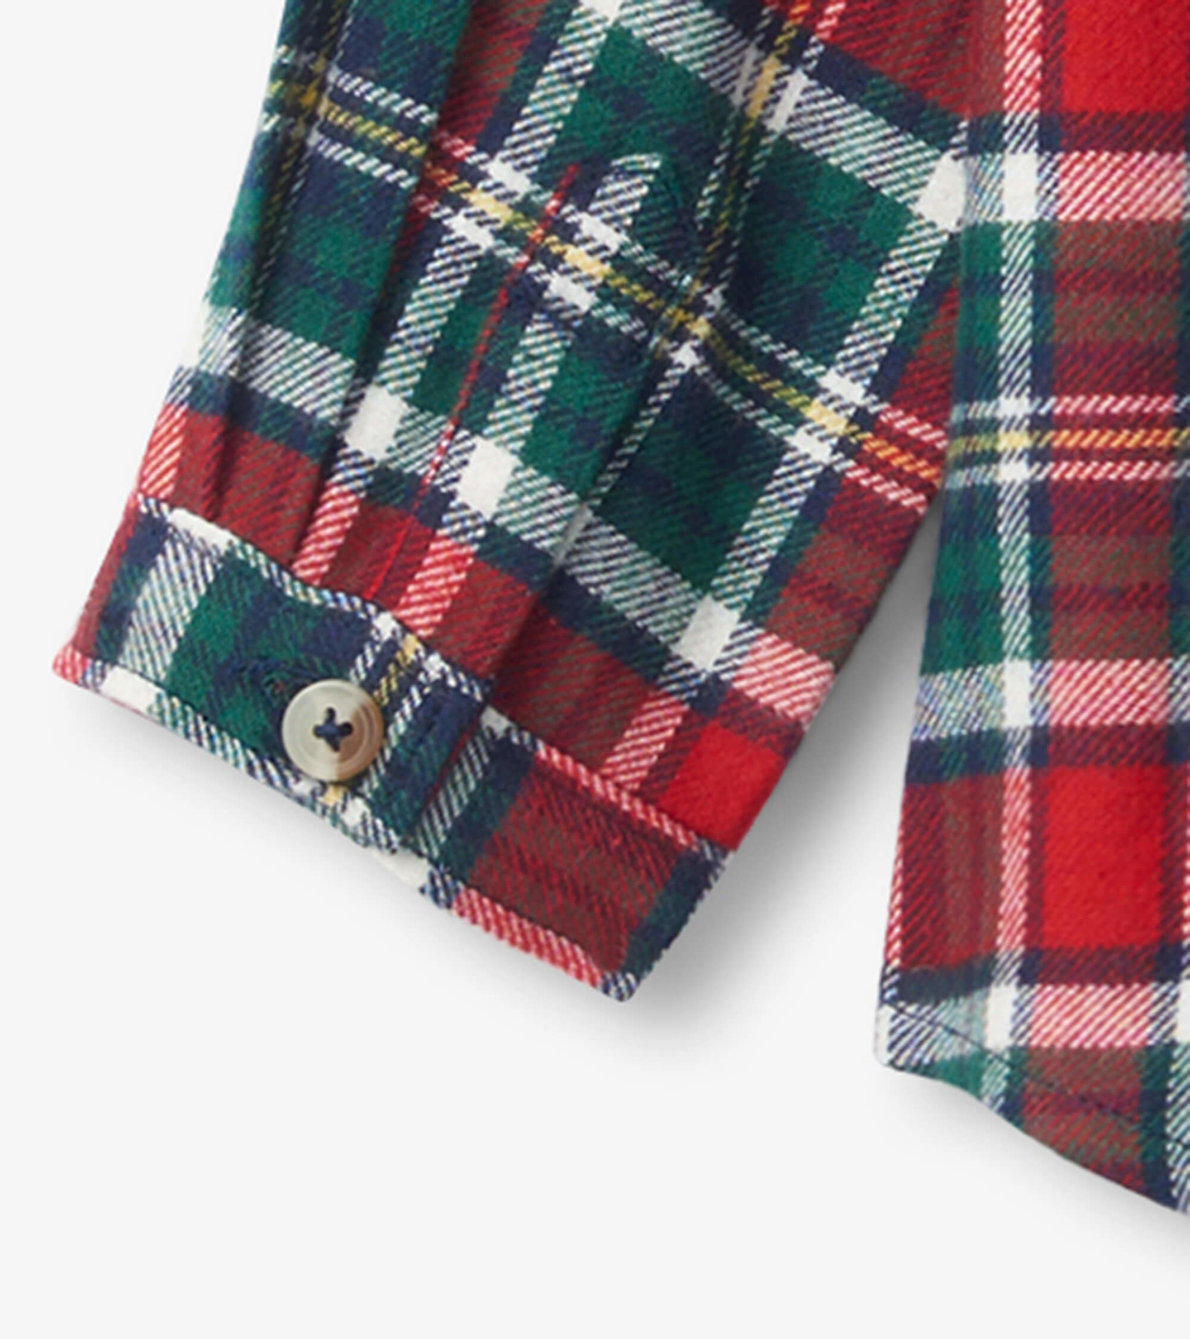 View larger image of Christmas Plaid Toddler Button Down Shirt